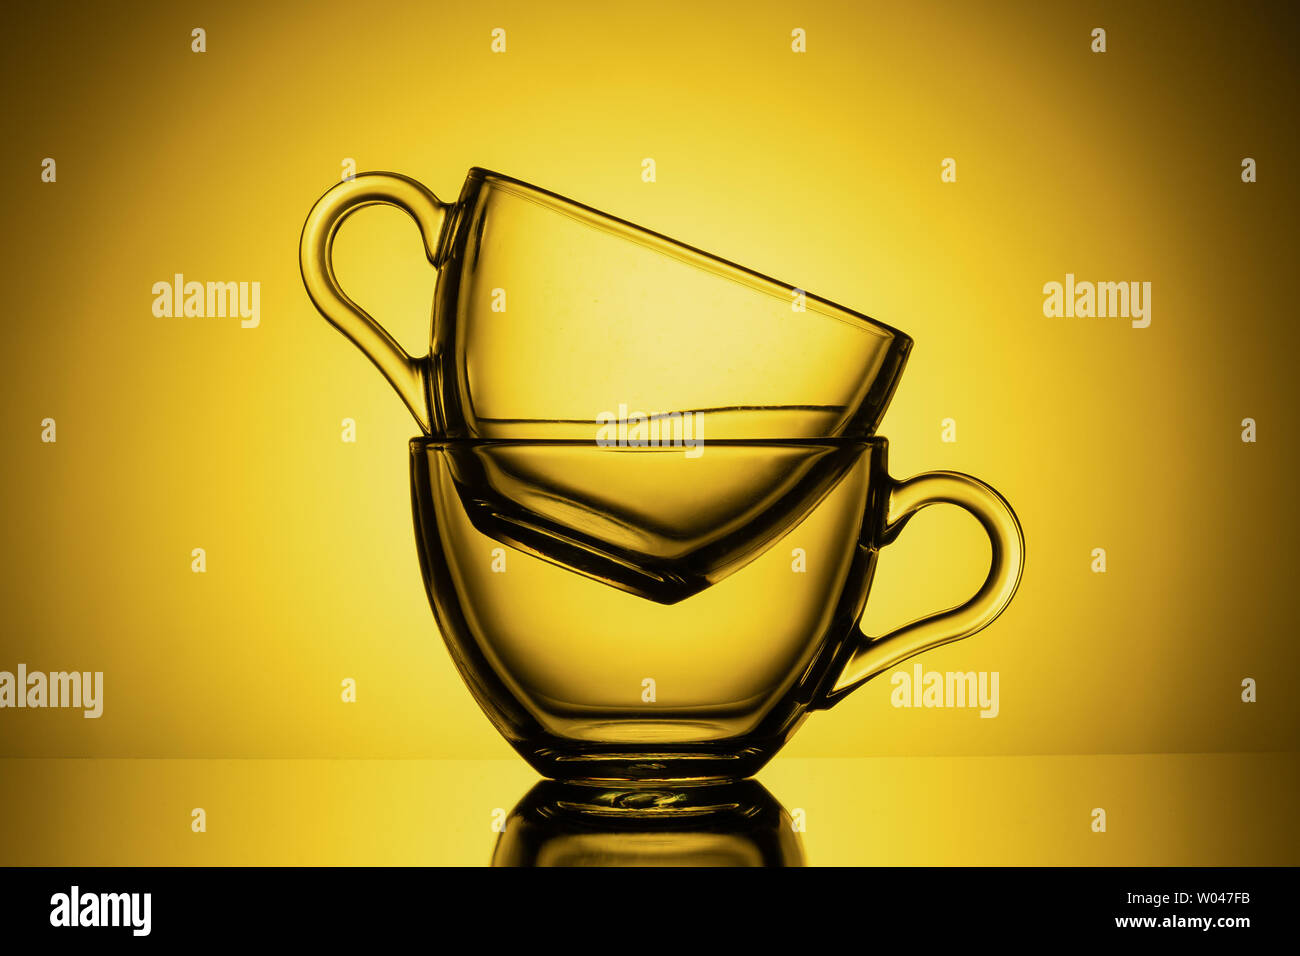 Two transparent glass mugs for tea. Yellow background, close-up, HORIZONTAL LAYOUT Stock Photo